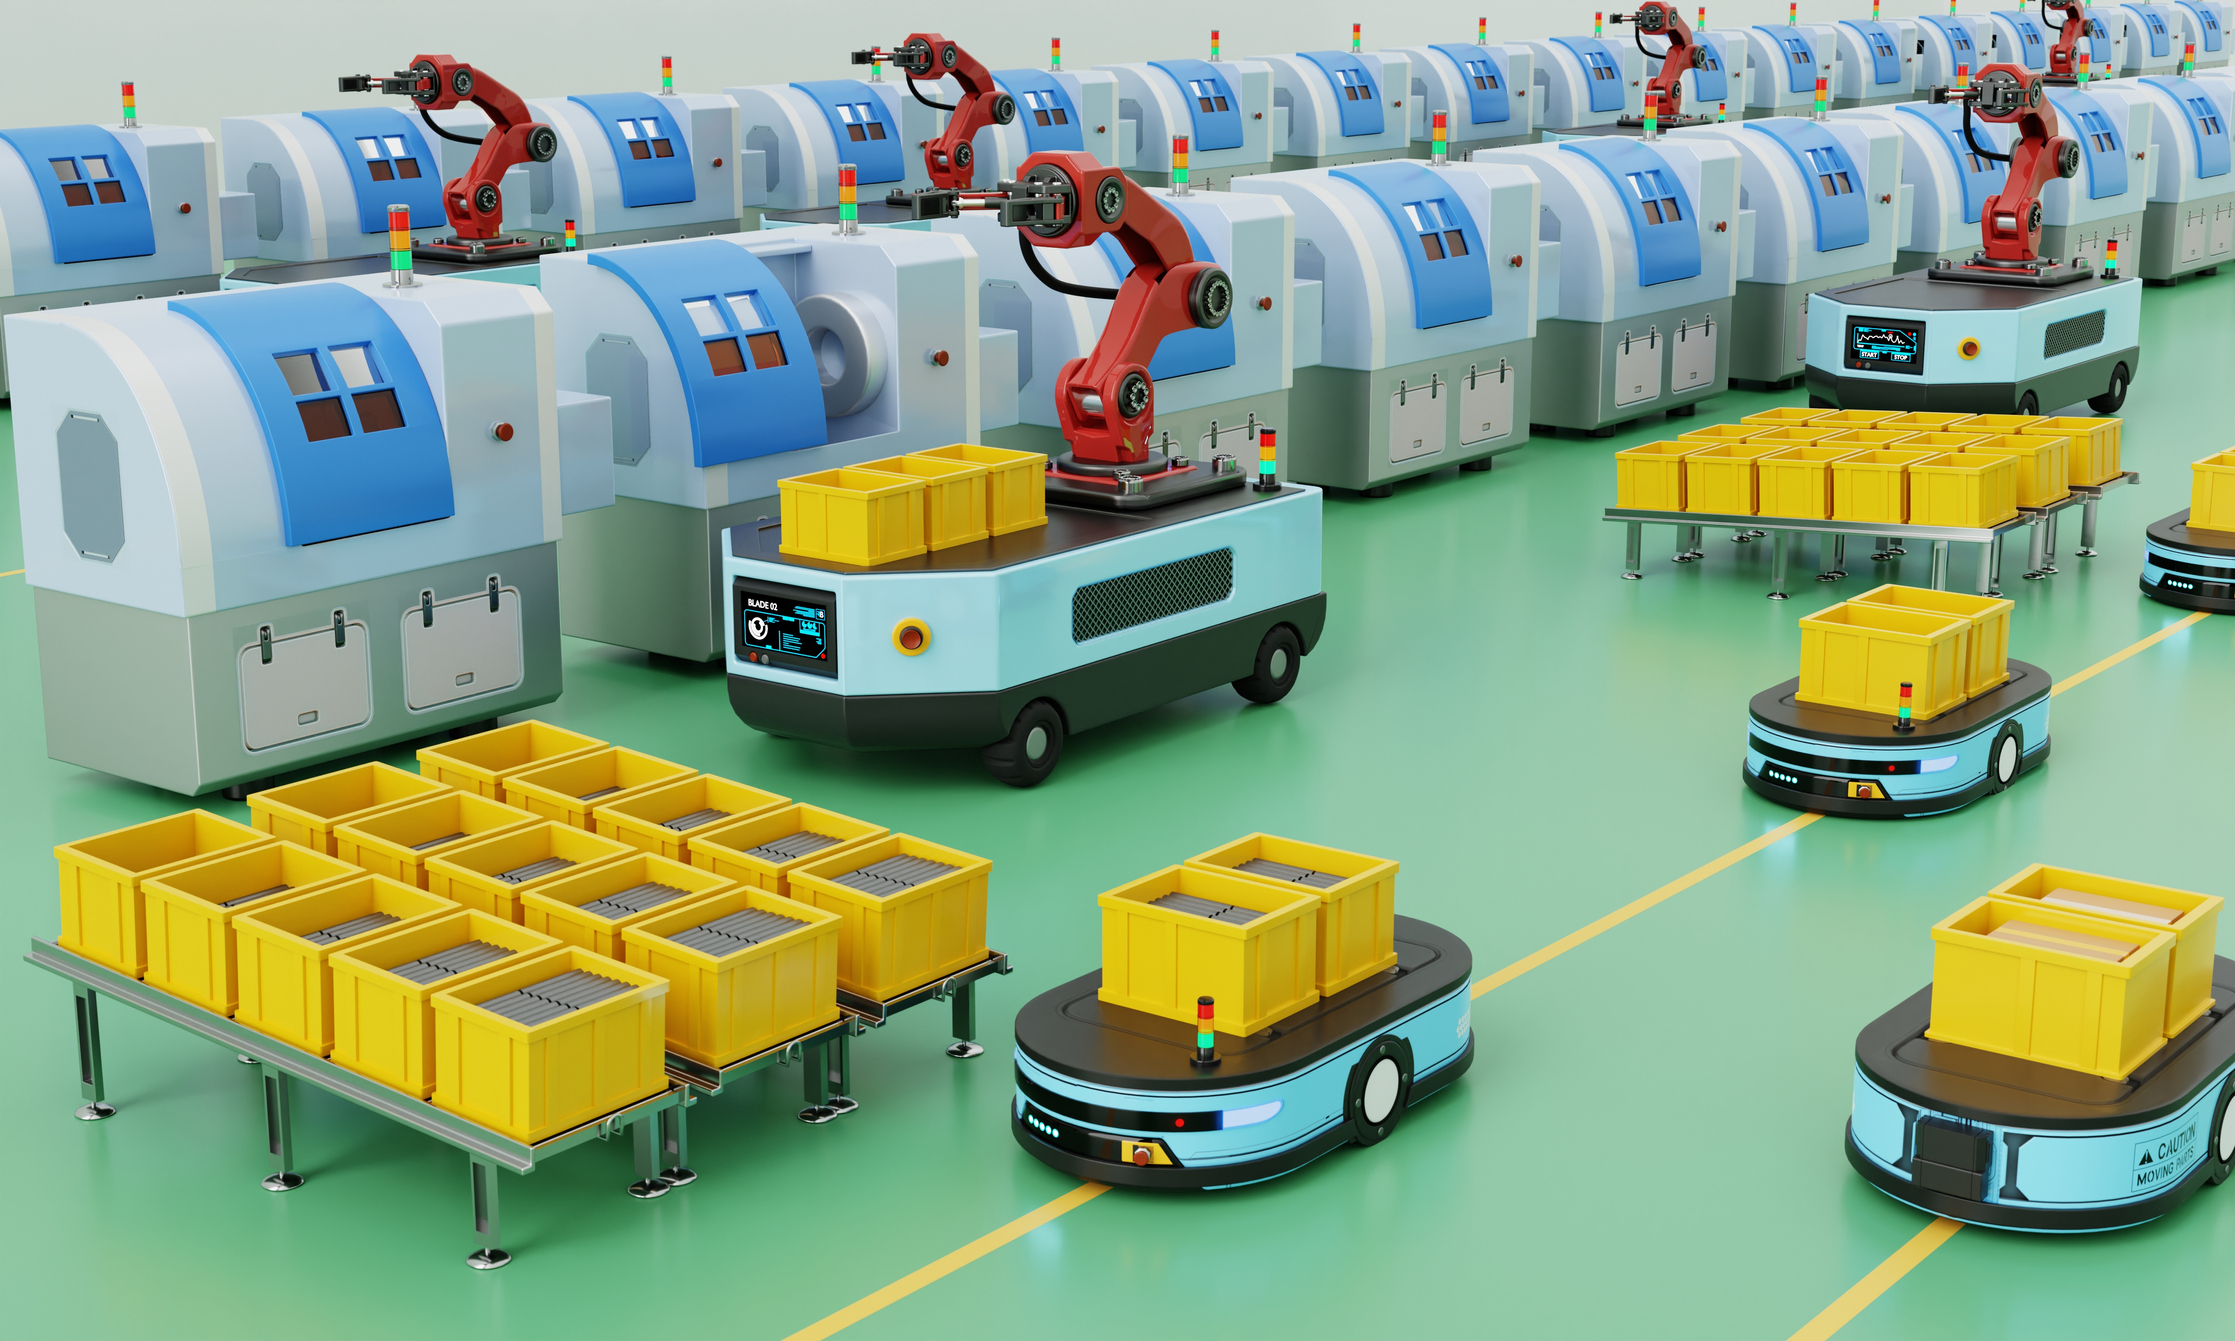 Automatic mass production line with robots and automated machines running by itself. which there is no human to control. Business and automation technology and industry concept. 3D illustration rendering